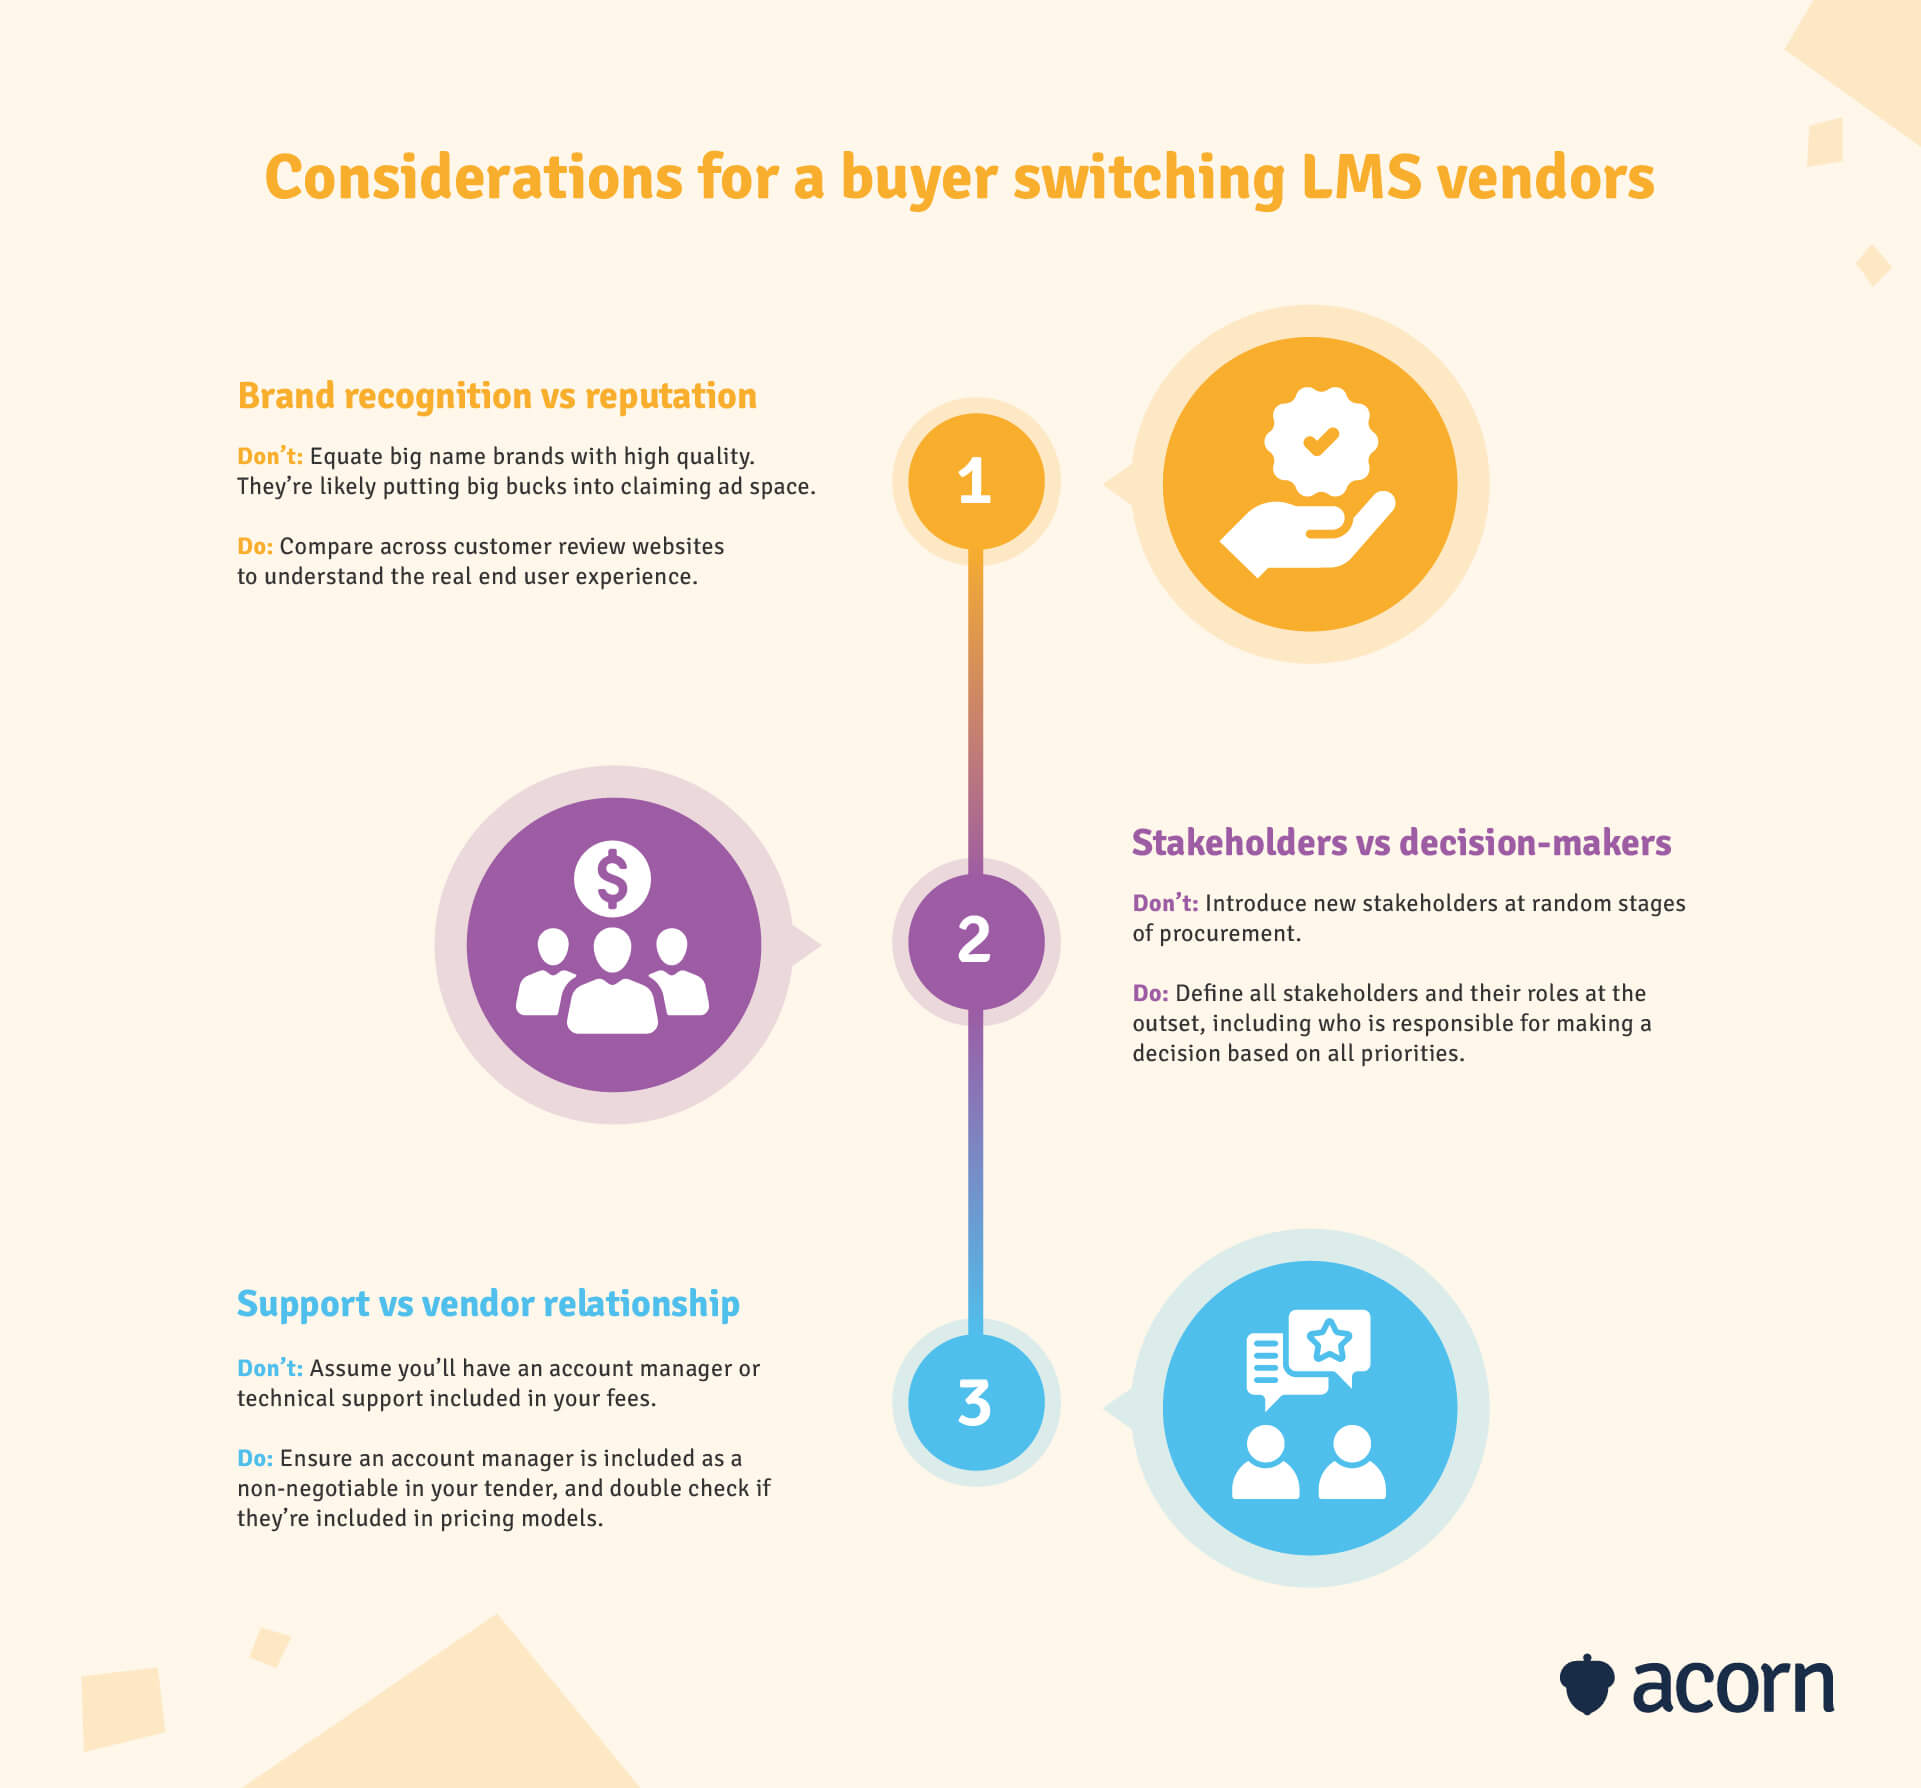 infographic showing three considerations for buyers switching LMS vendors